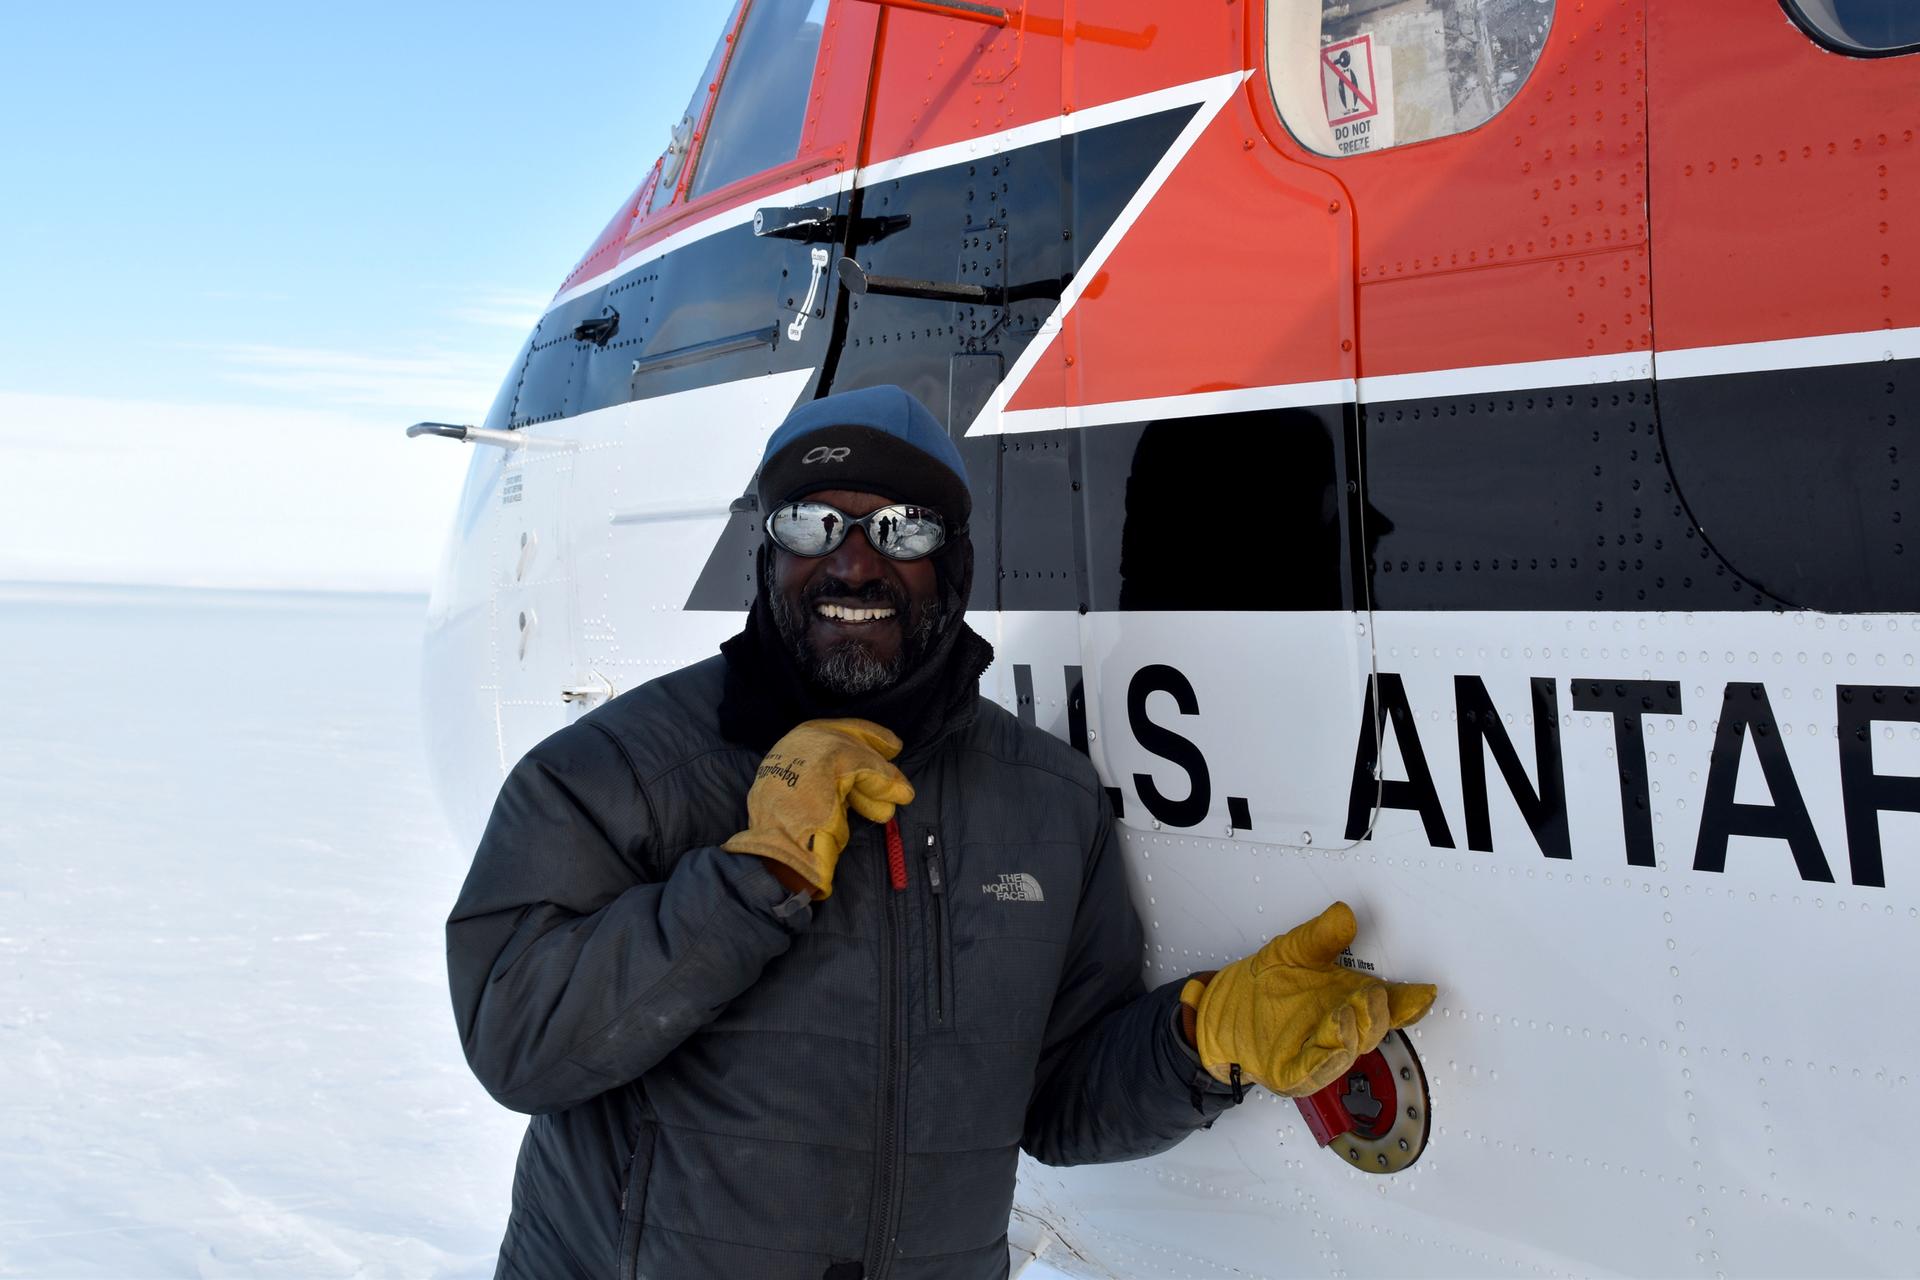 A man smiles in a posed photo in front of a Twin Otter airplane.